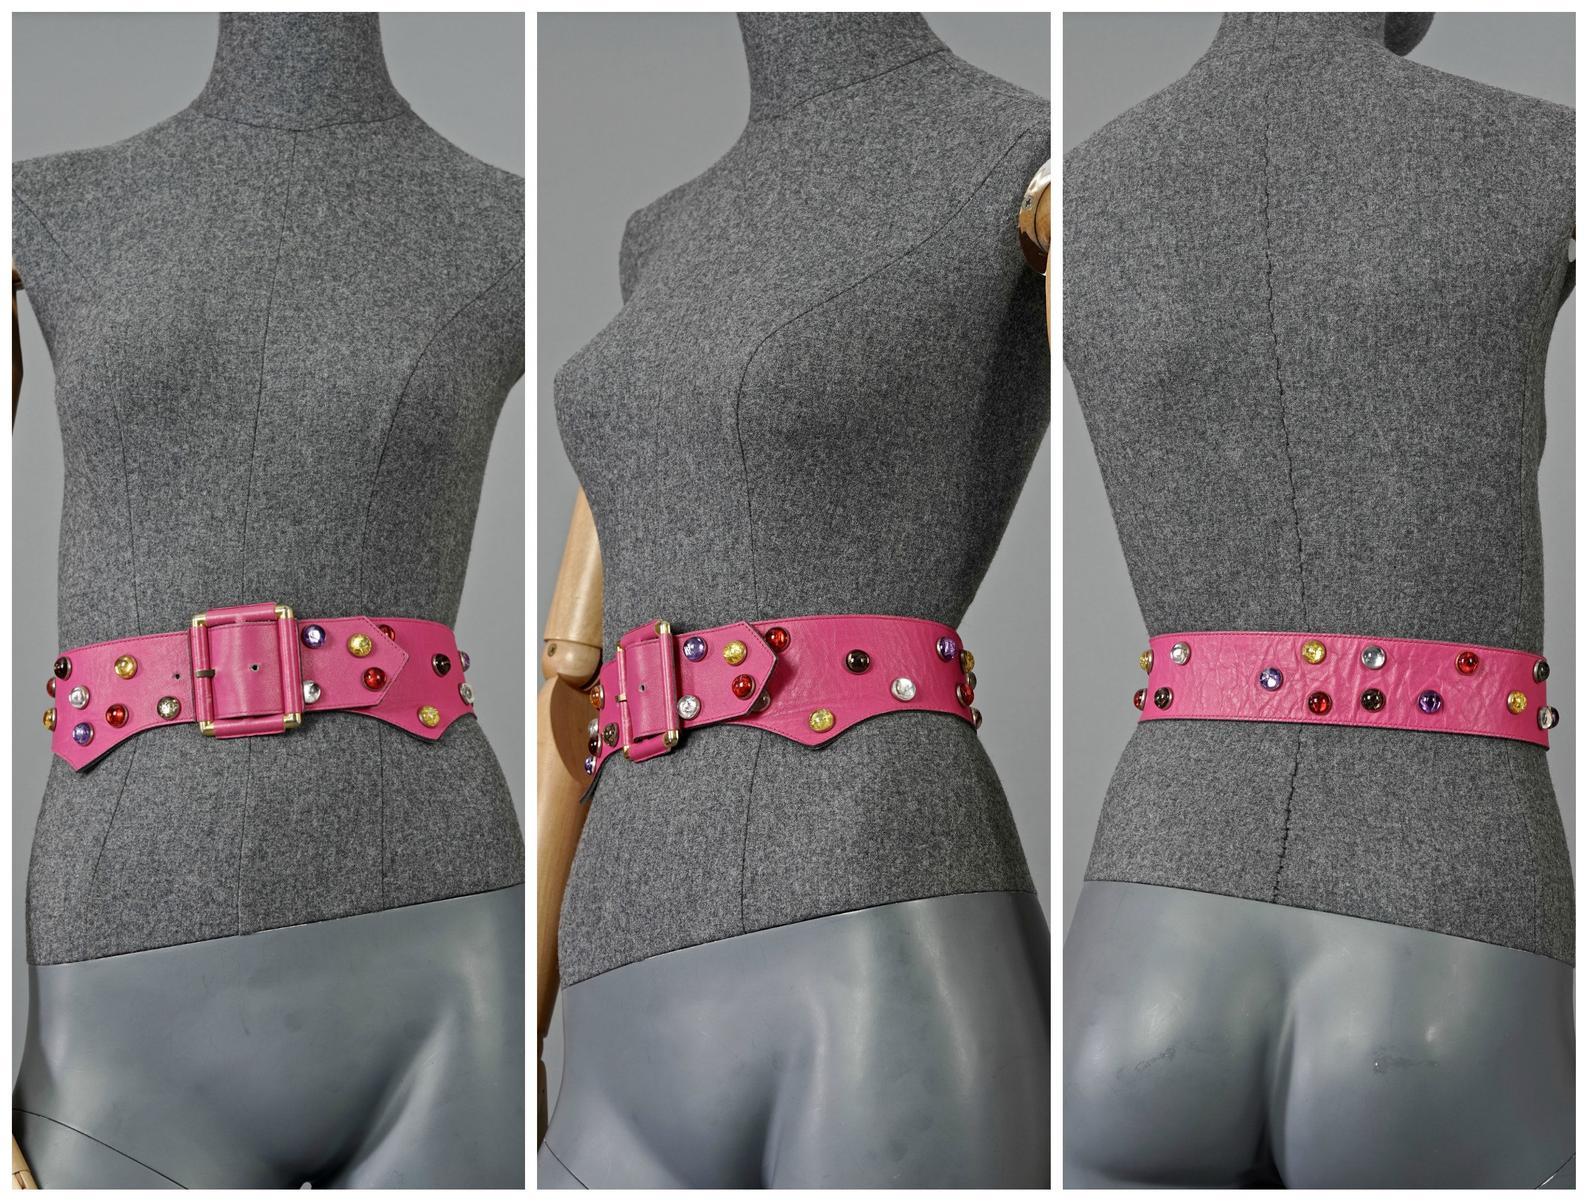 Vintage YVES SAINT LAURENT Ysl Cabochon Studded Pink Belt

Measurements:
Height: 2.95 inches (7.5 cm)
Wearable Length: 25.78 inches to 27.75 inches (65.5 cm to 70.5 cm)

Features:
- 100% Authentic YVES SAINT LAURENT.
- Pink leather belt studded with